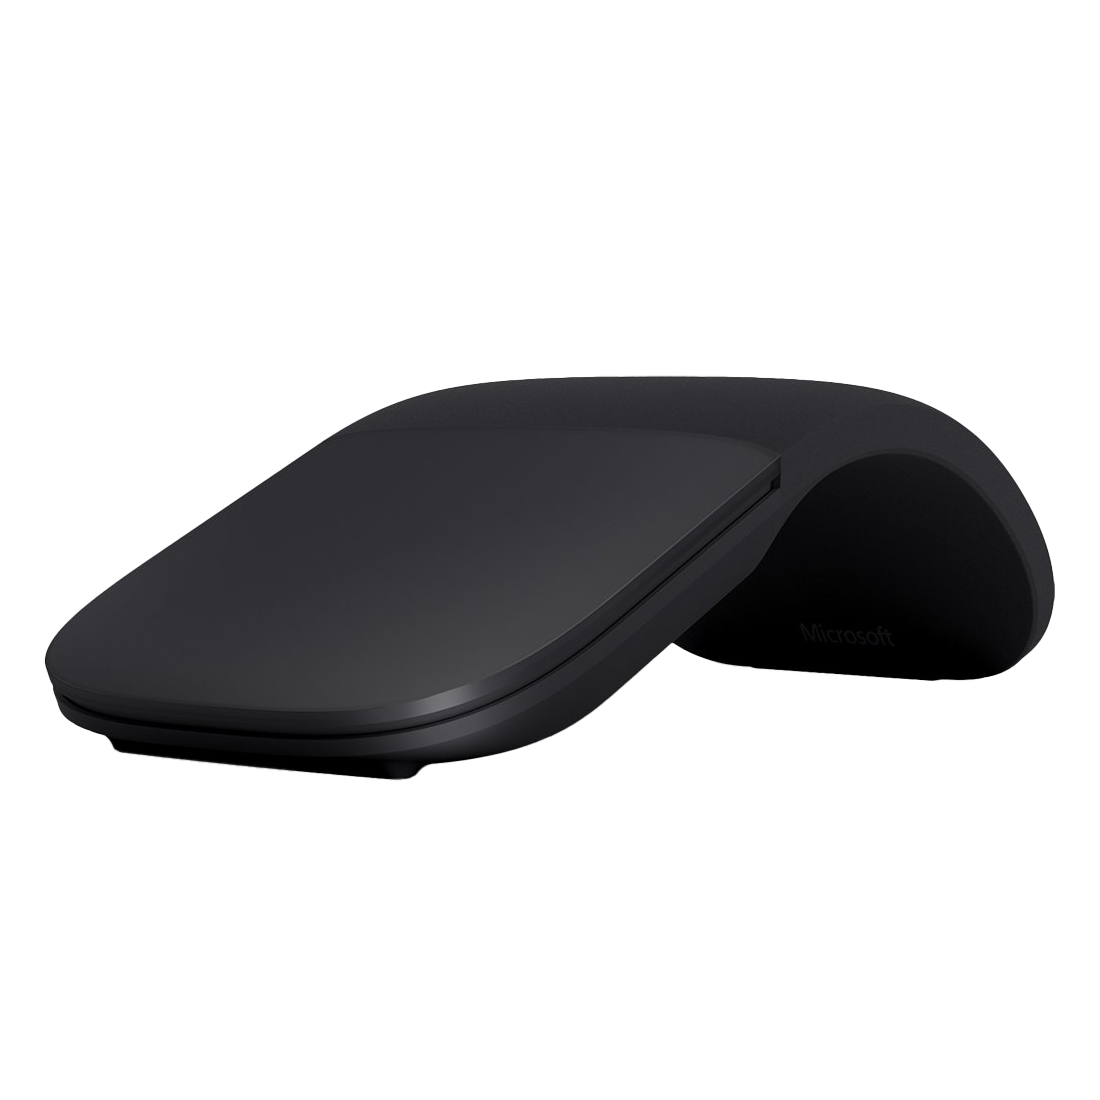 Microsoft Surface Arc black wireless mouse arched 